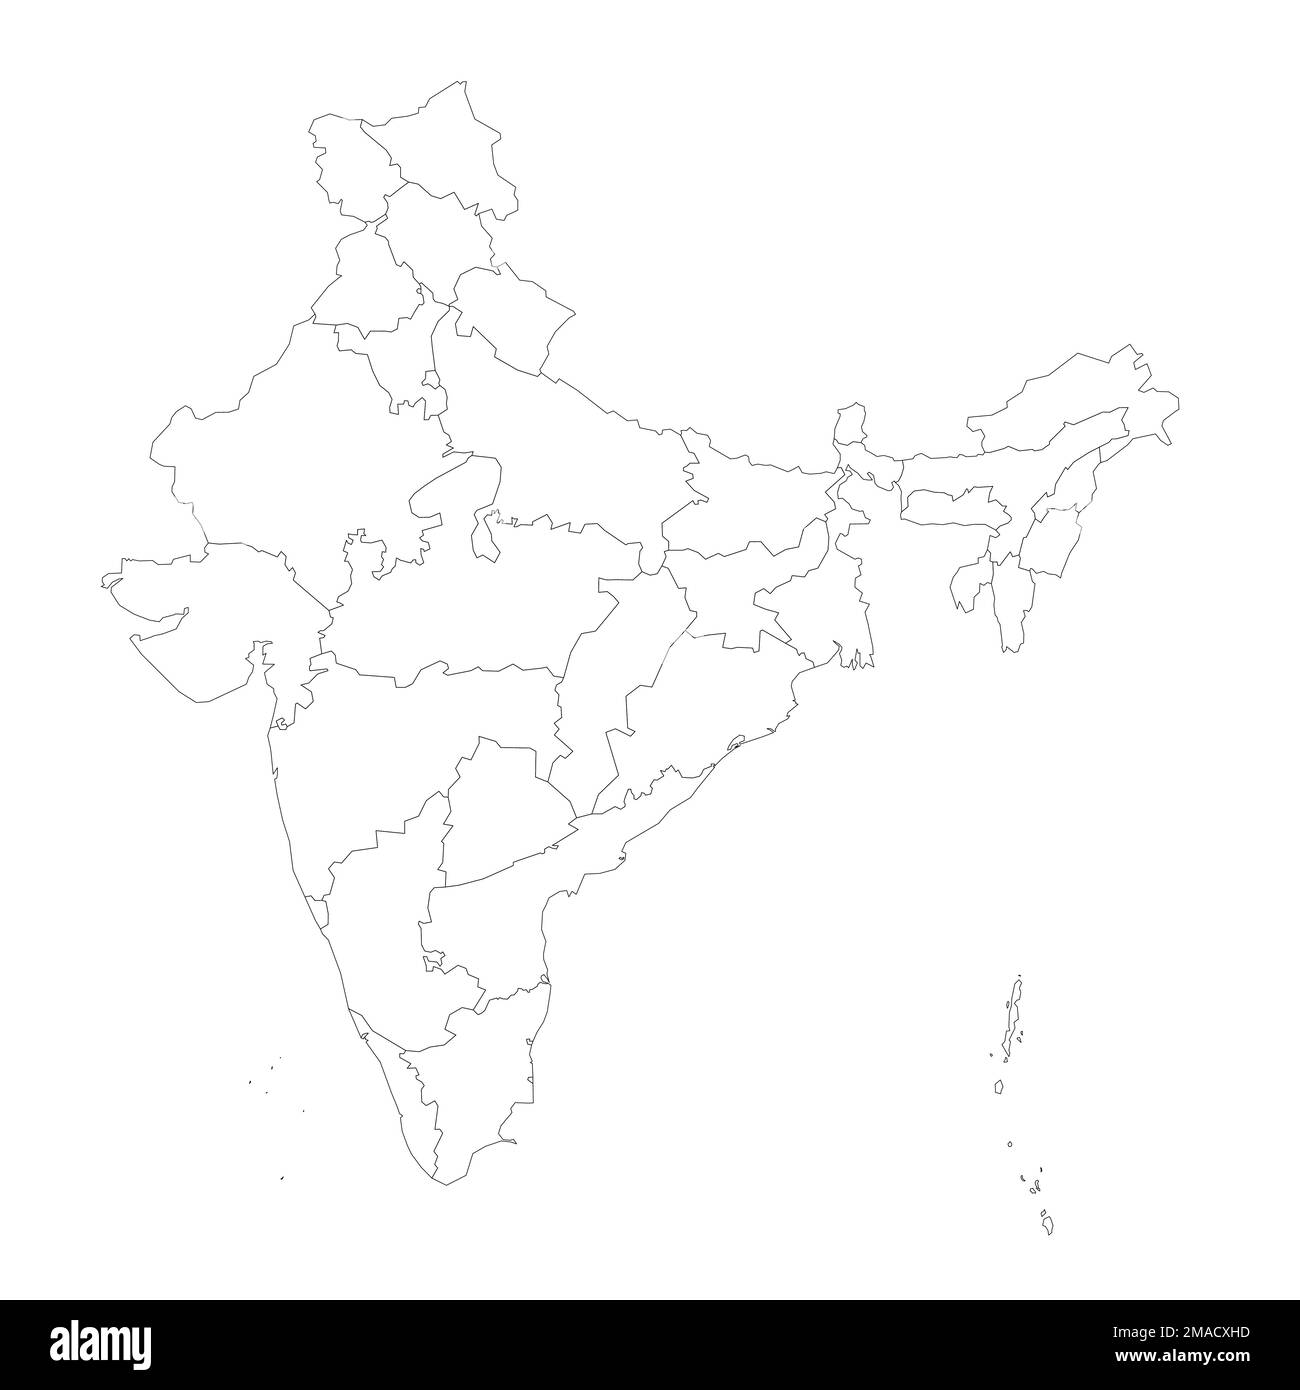 India political map of administrative divisions - states and union teritorries. Blank outline map. Solid thin black line borders. Stock Vector